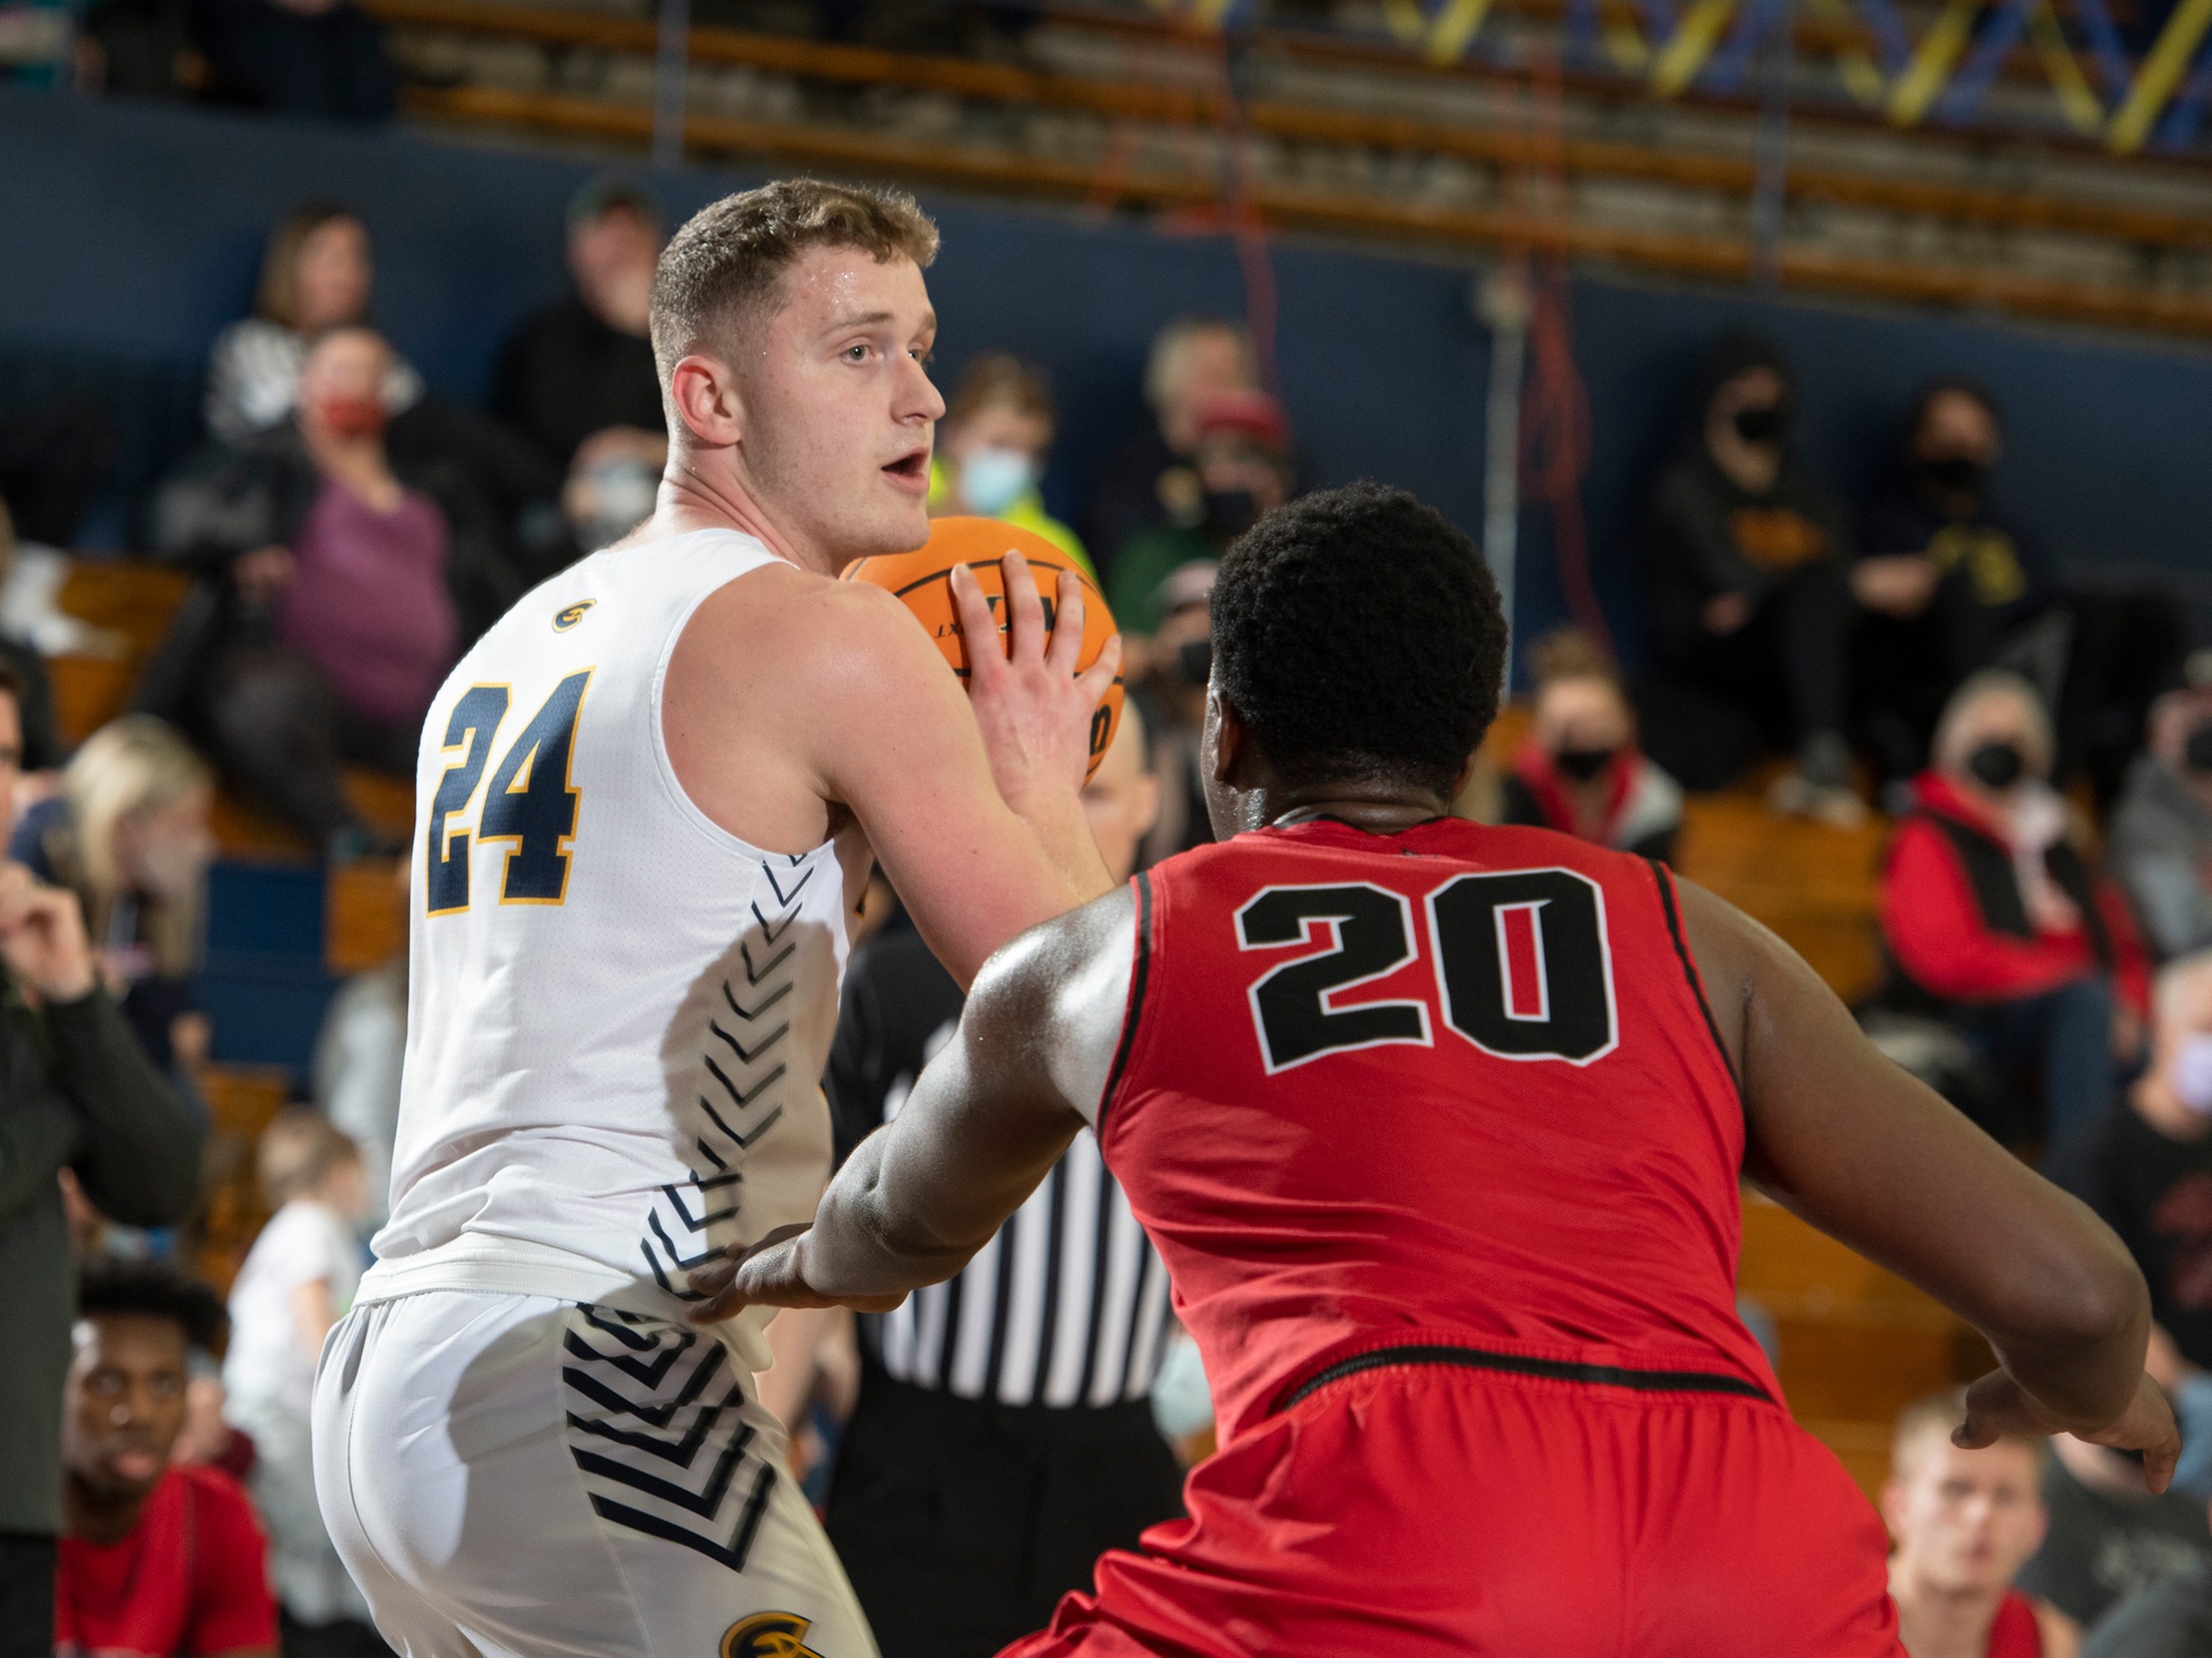 Blugolds Unable to Hold on After Strong First Half